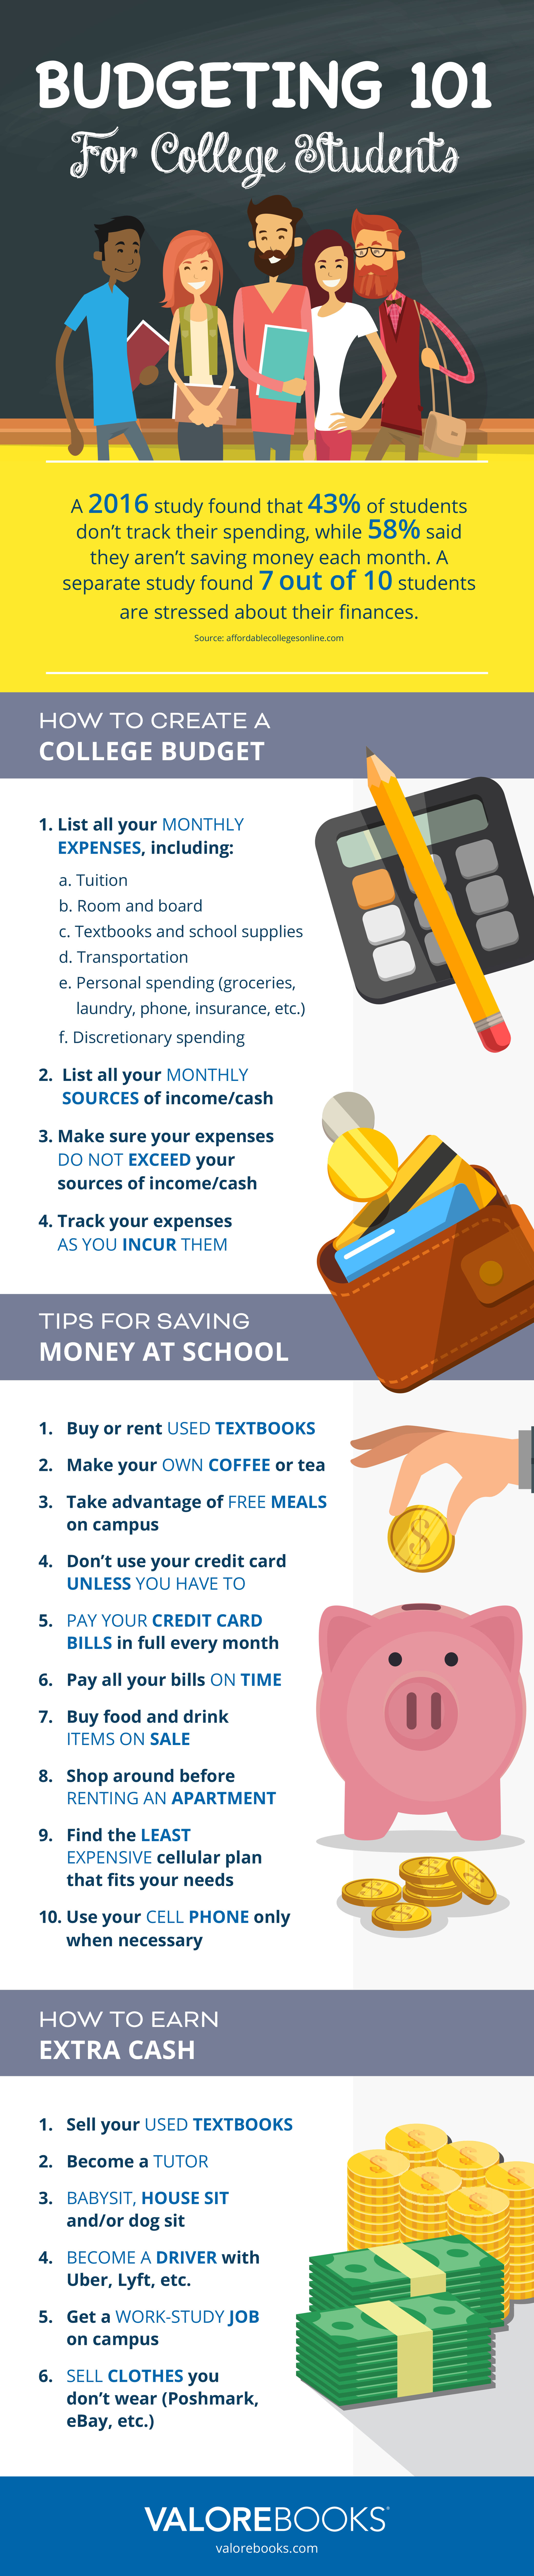 College budgeting infographic